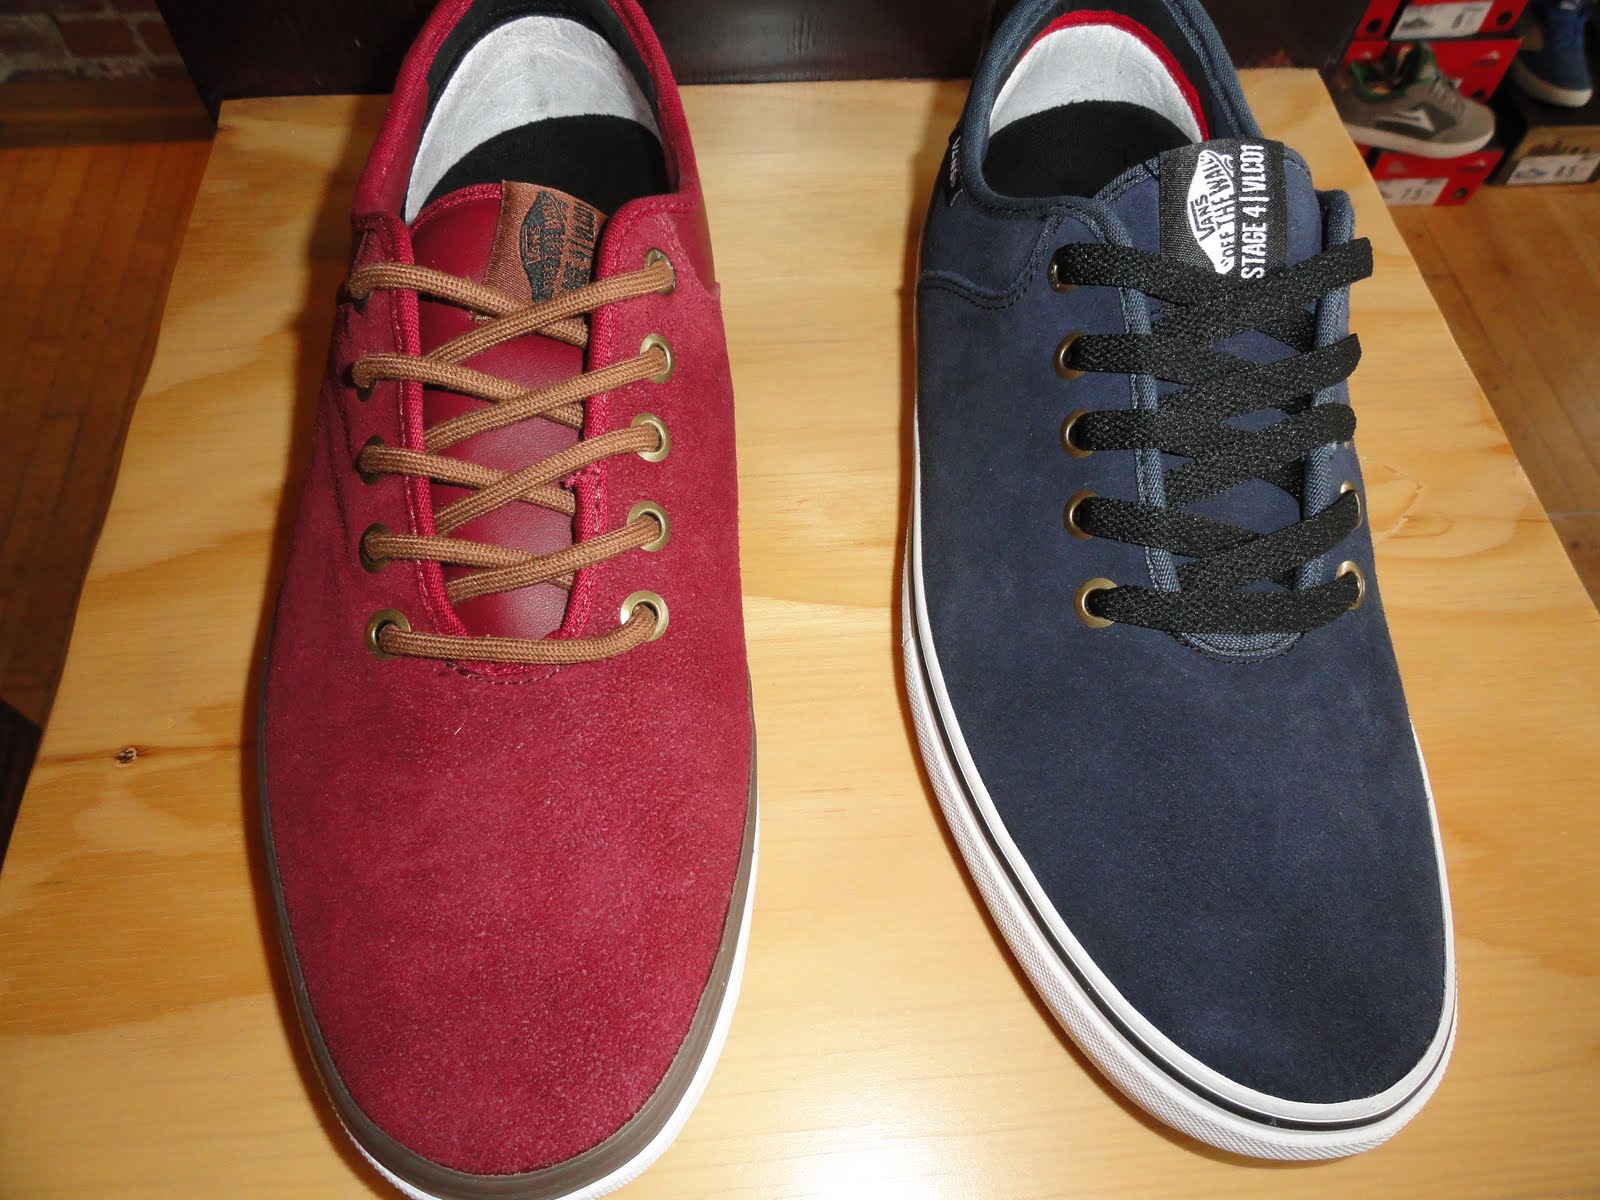 Subsect: Vans Stage 4.